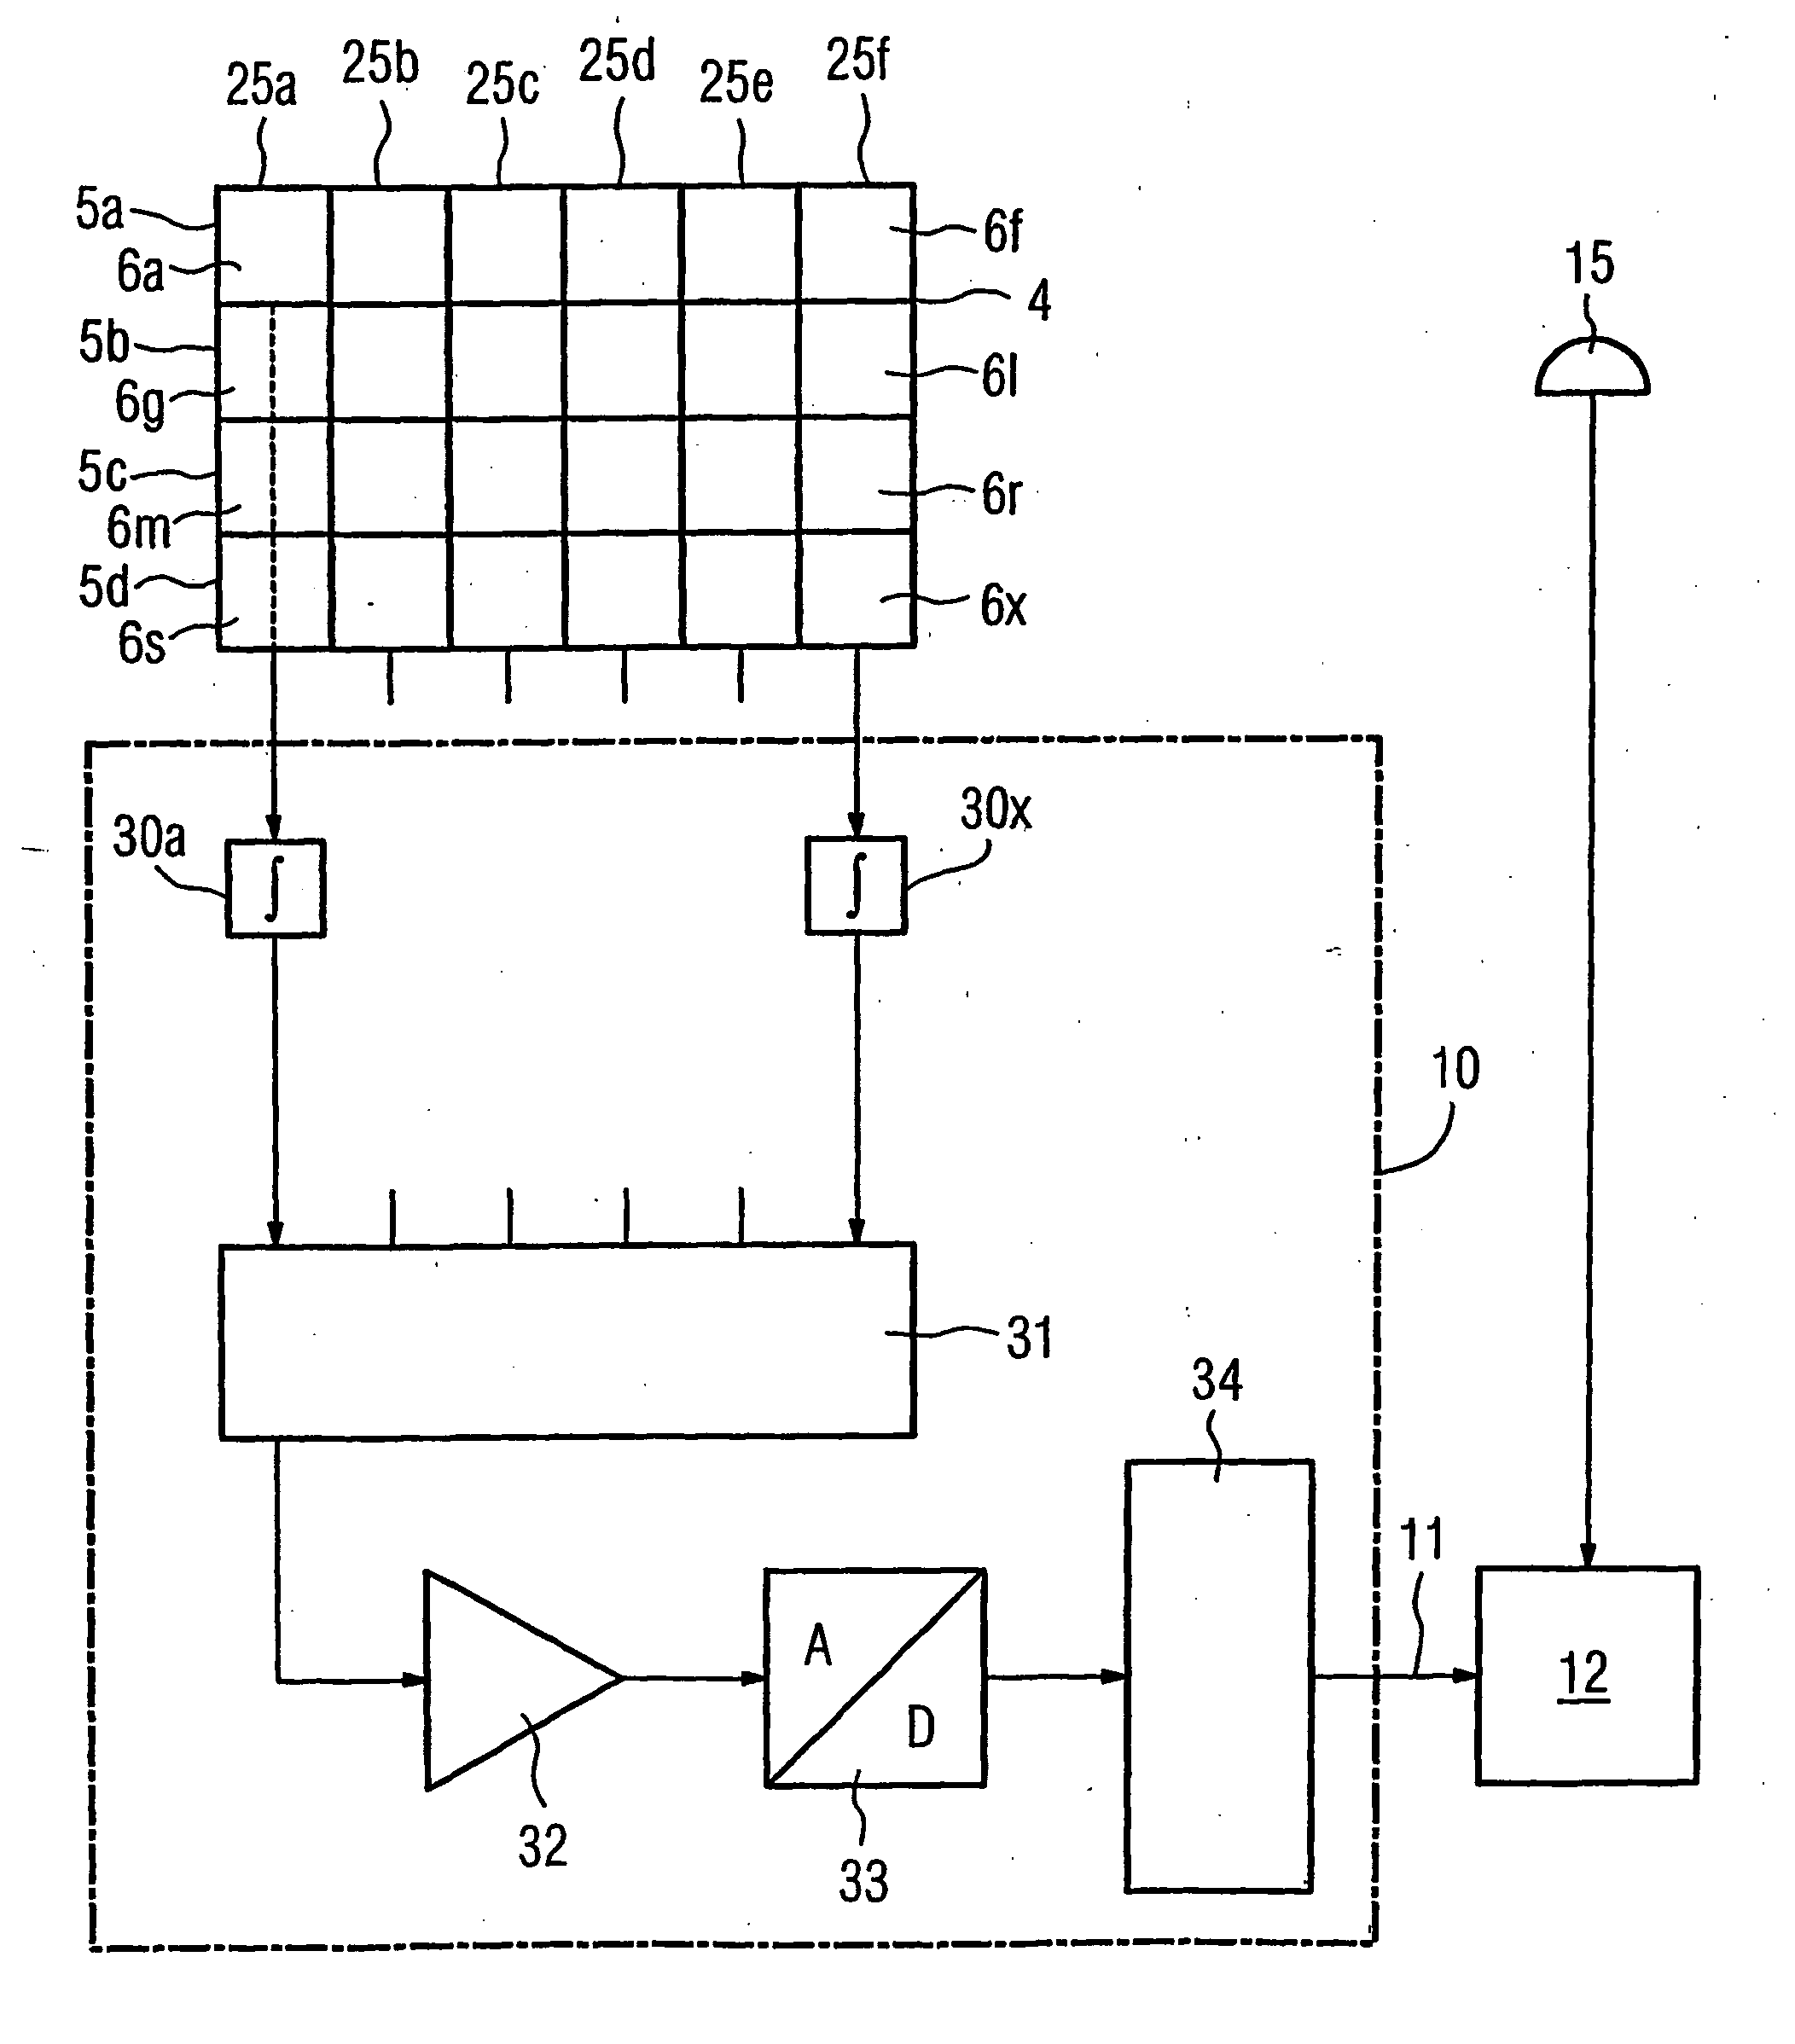 Computer tomography unit with a data recording system